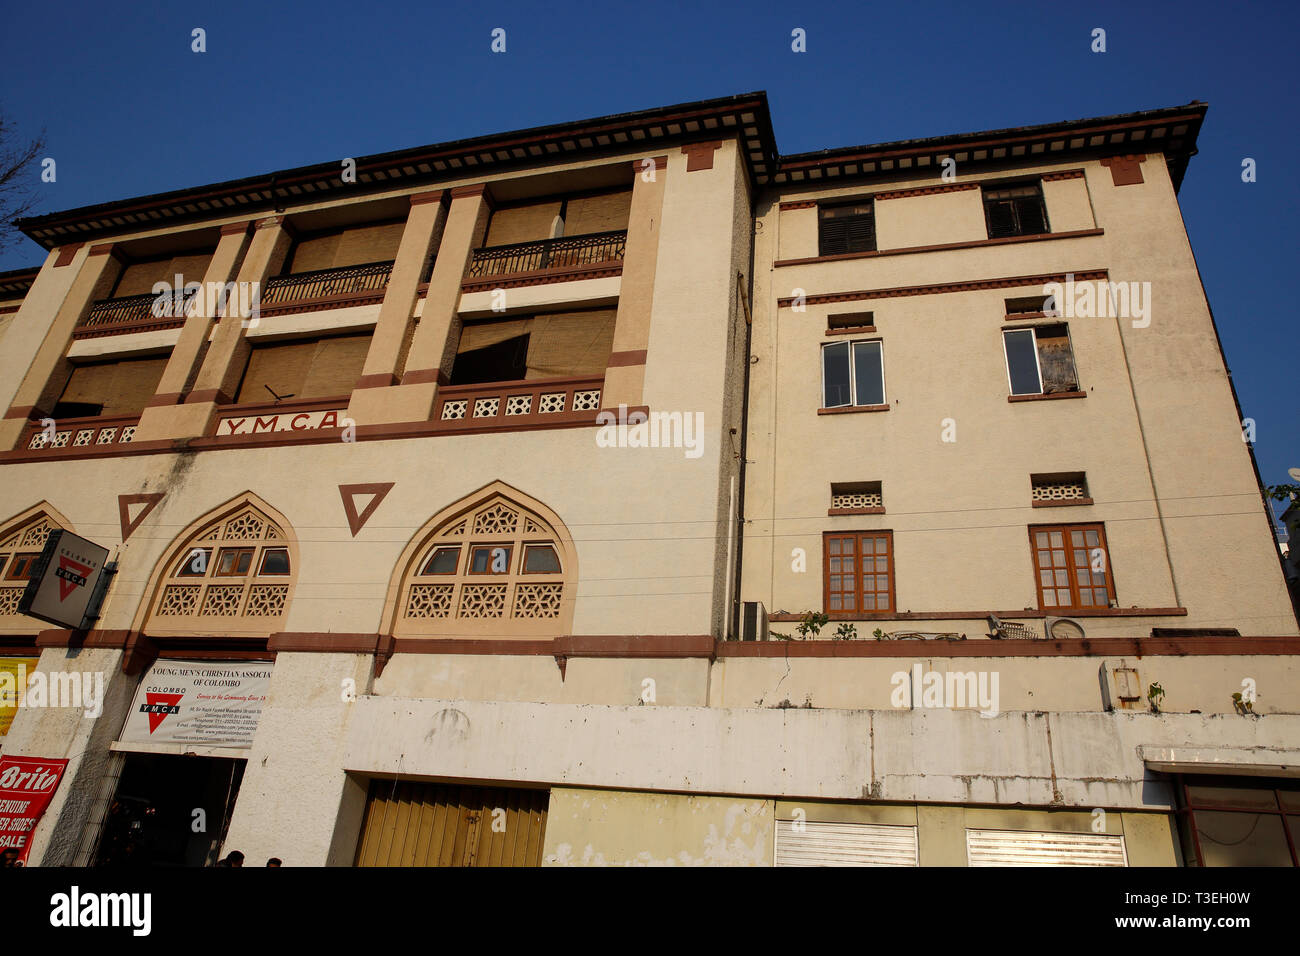 The Young Men's Christian Association (YMCA) building in Colombo city, established in 1882. Colombo, Sri Lanka. Stock Photo